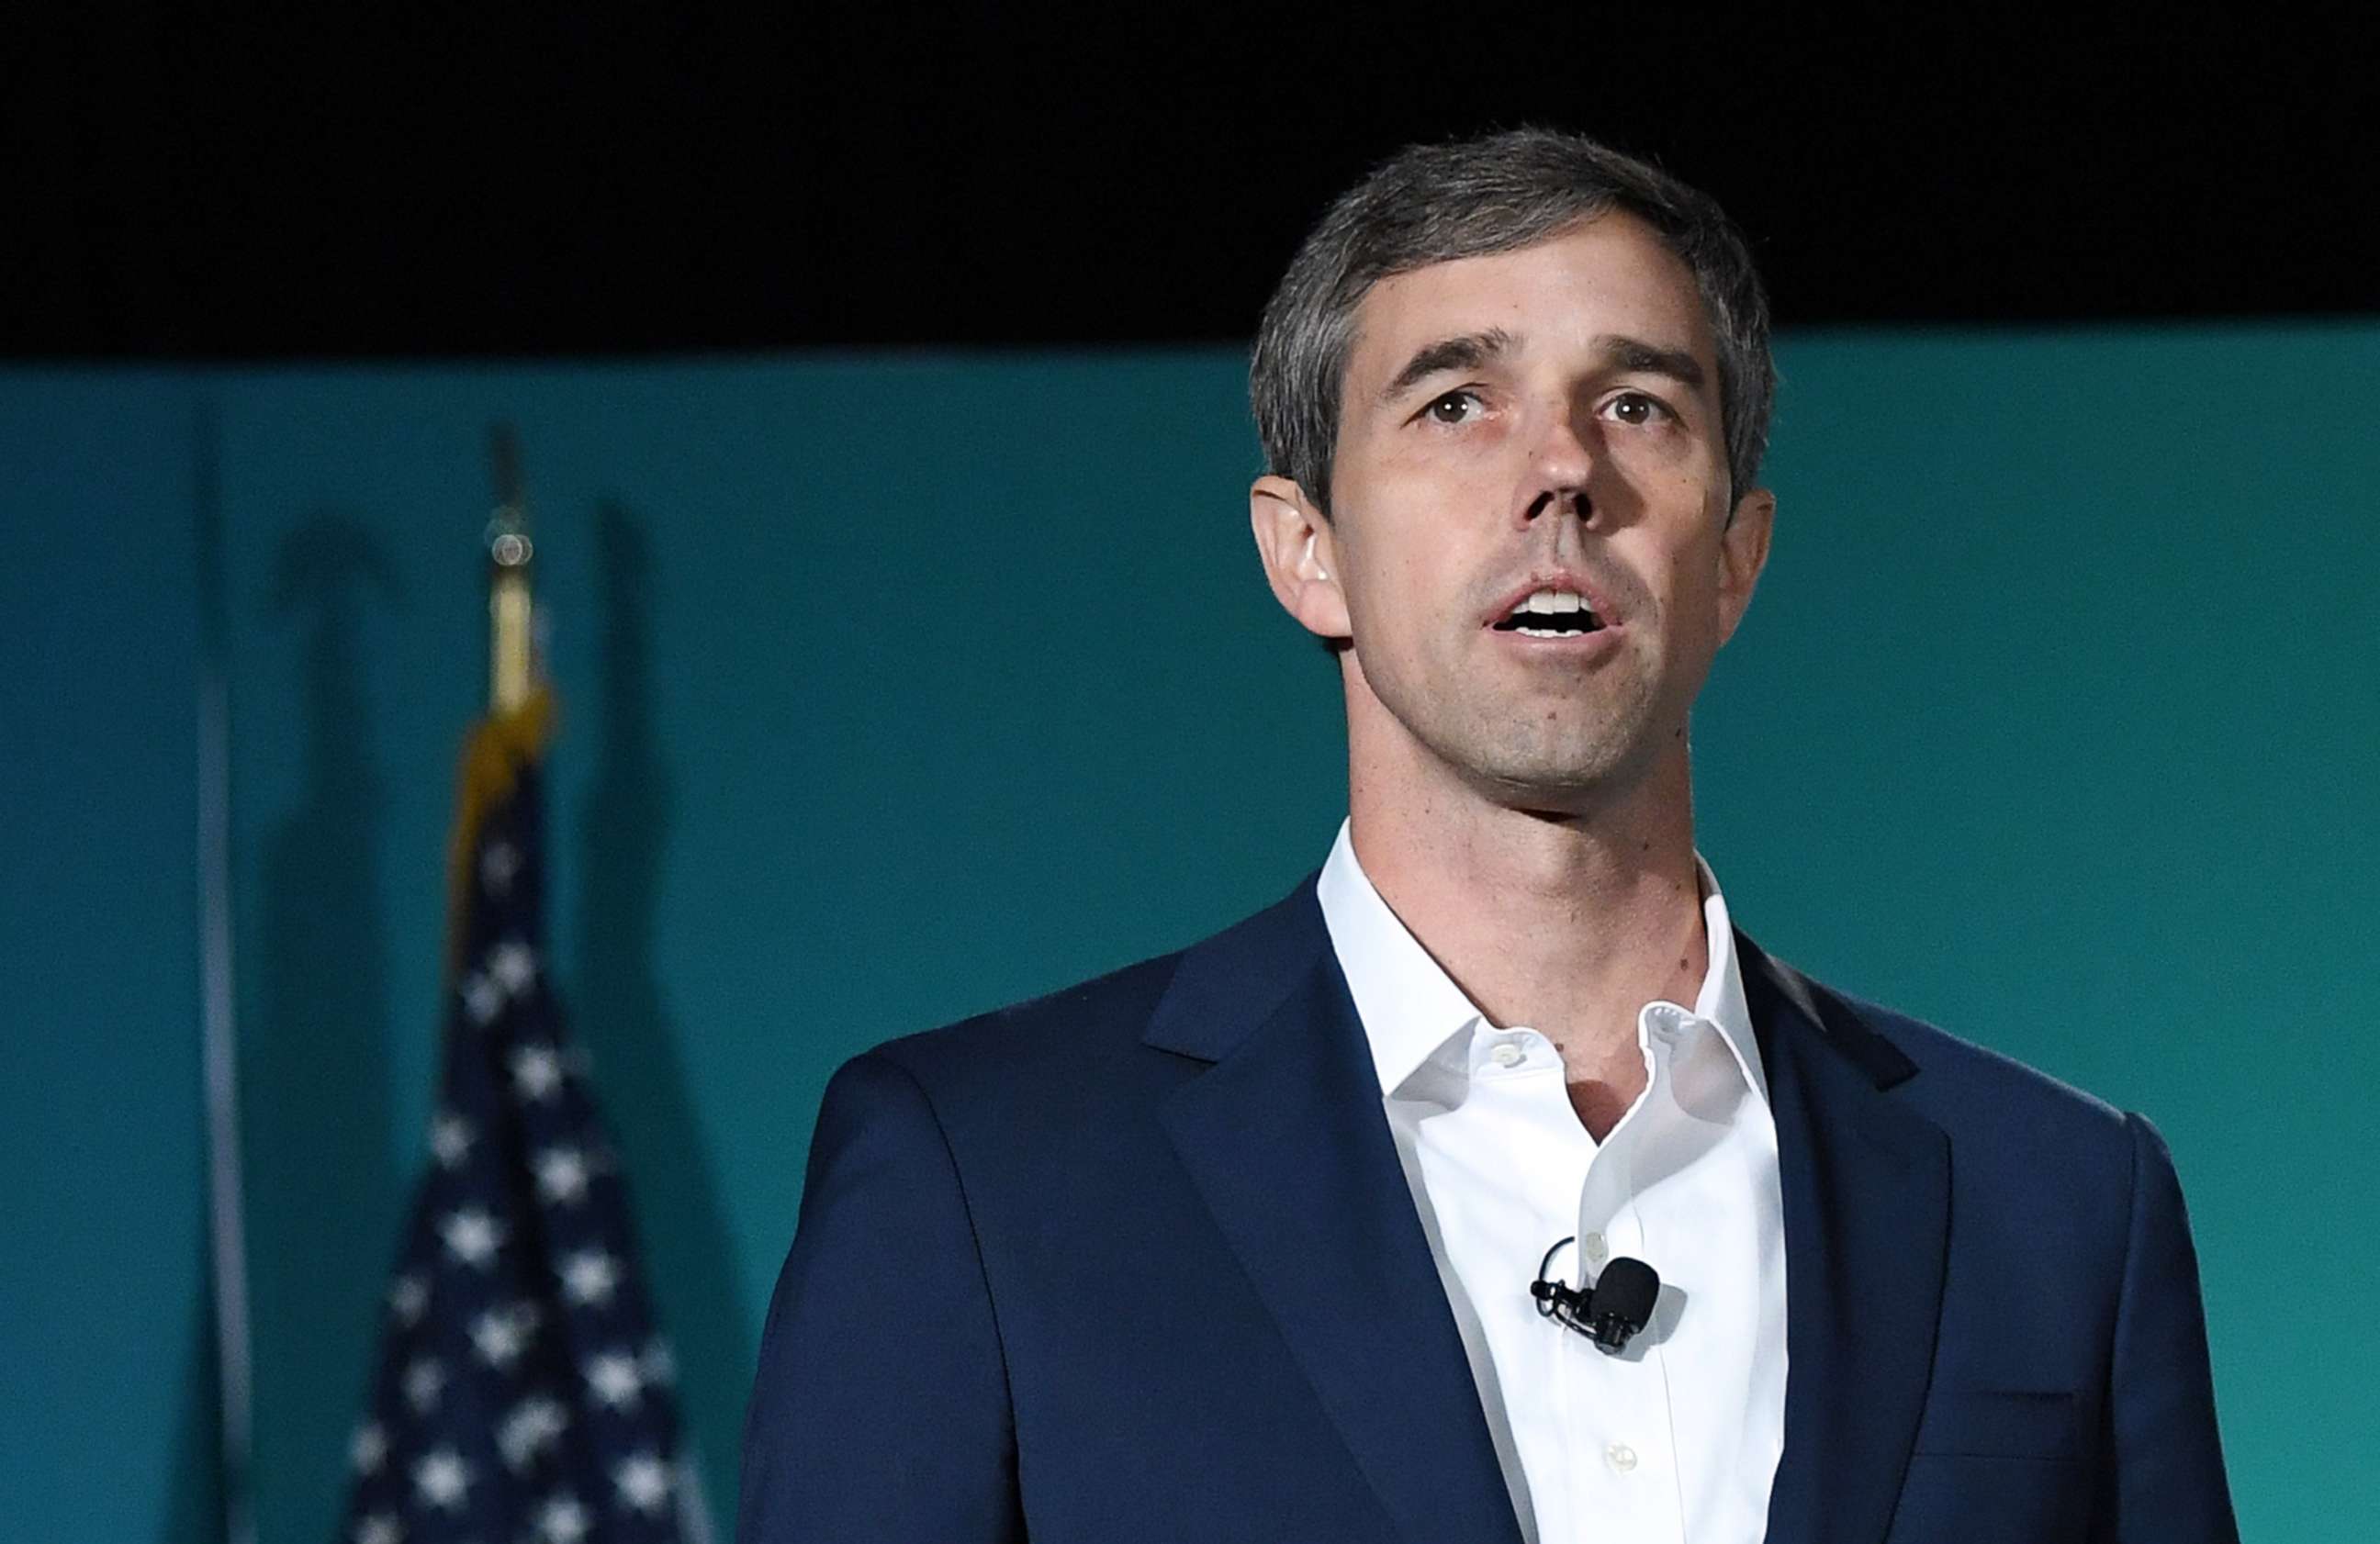 PHOTO: Democratic presidential candidate Beto O'Rourke speaks during the 2020 Public Service Forum hosted by the American Federation of State, County and Municipal Employees at UNLV on Aug. 3, 2019 in Las Vegas.